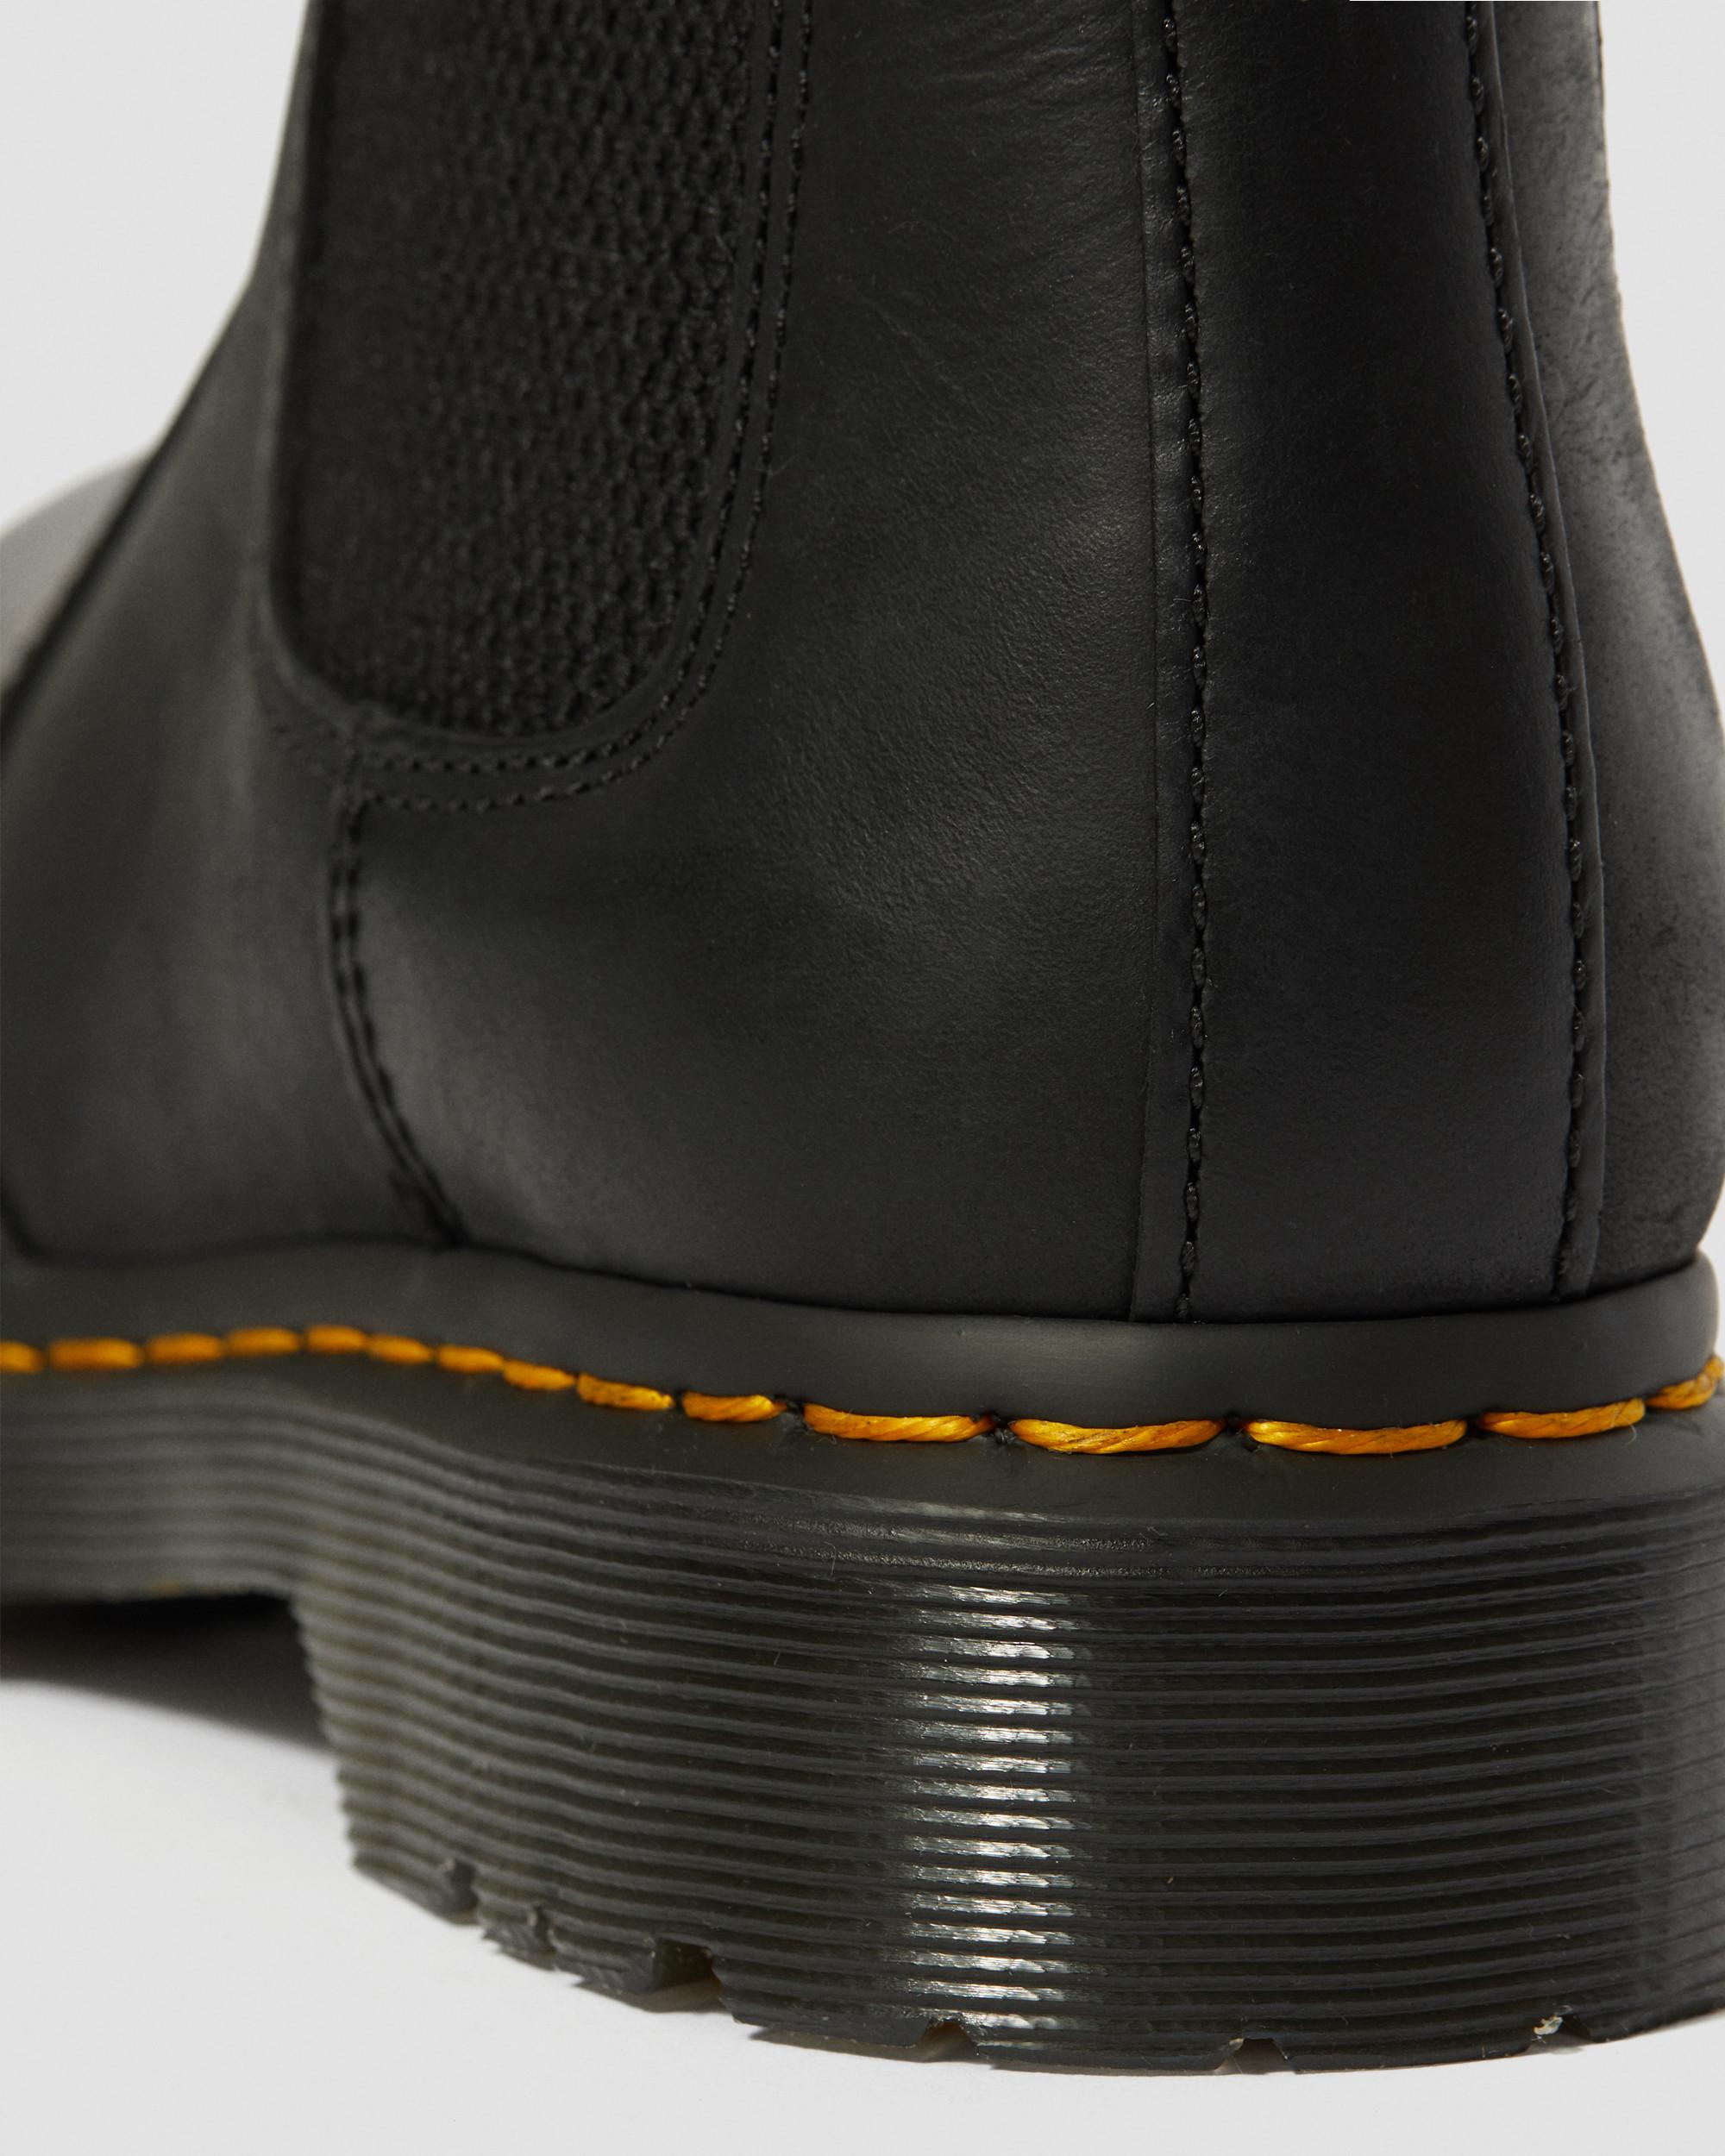 Are Dr. Marten Boots True To Size?, LMents of Style